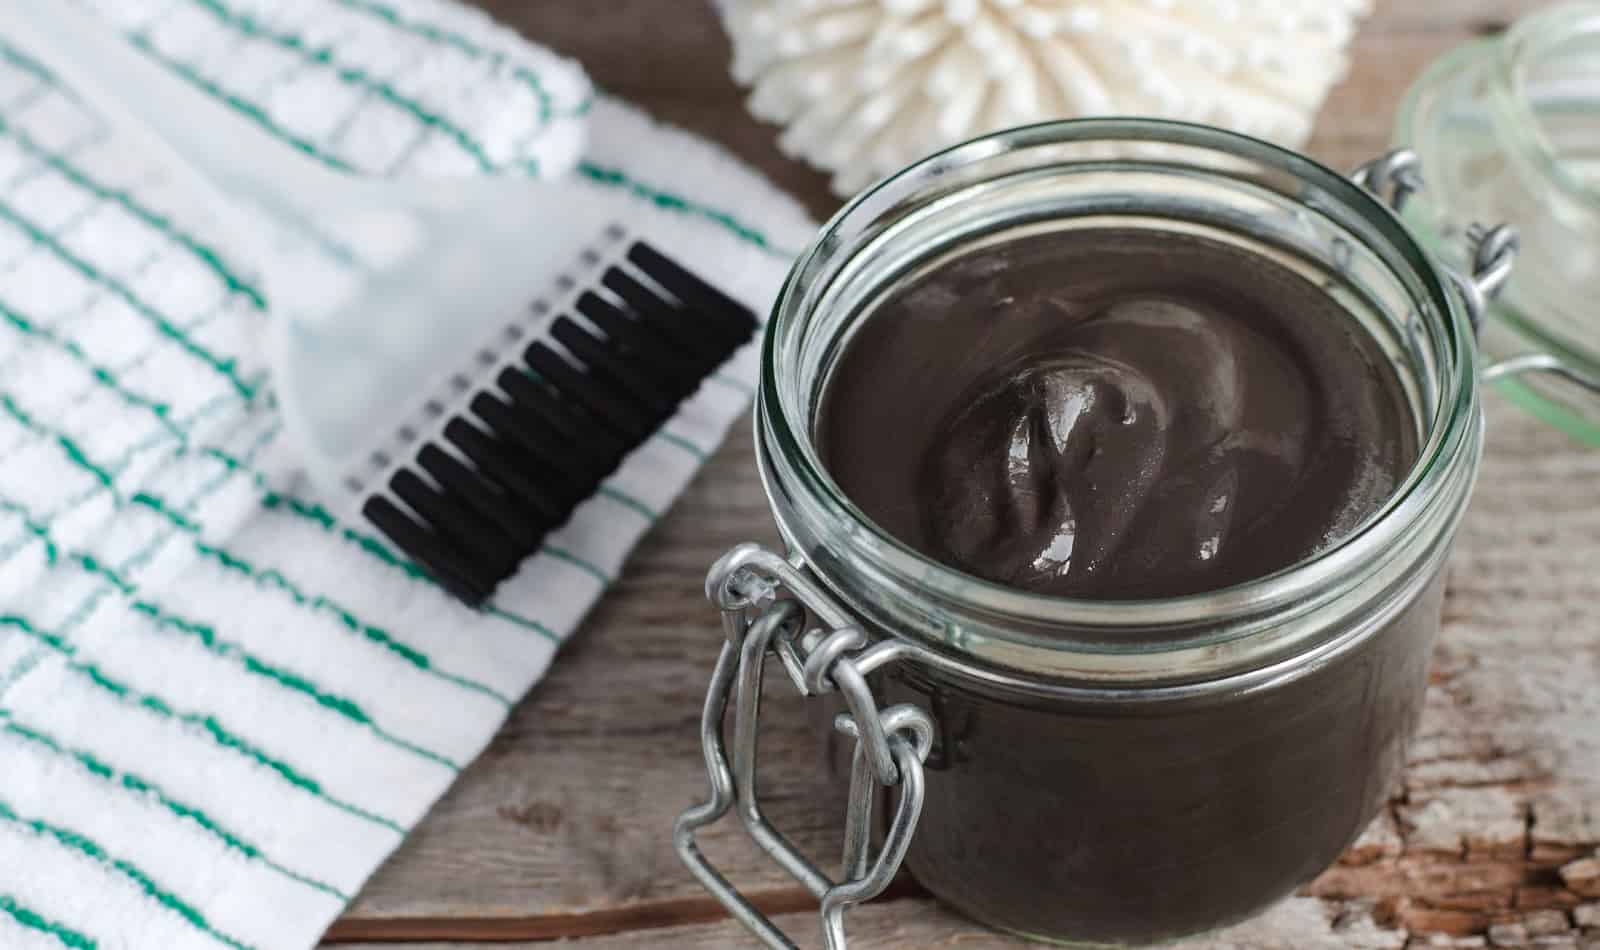 Thinking about trying out some rhassoul clay hair masks to see how they work for you? Then you'll want to check out our top 6 recommendations to buy or DIY!